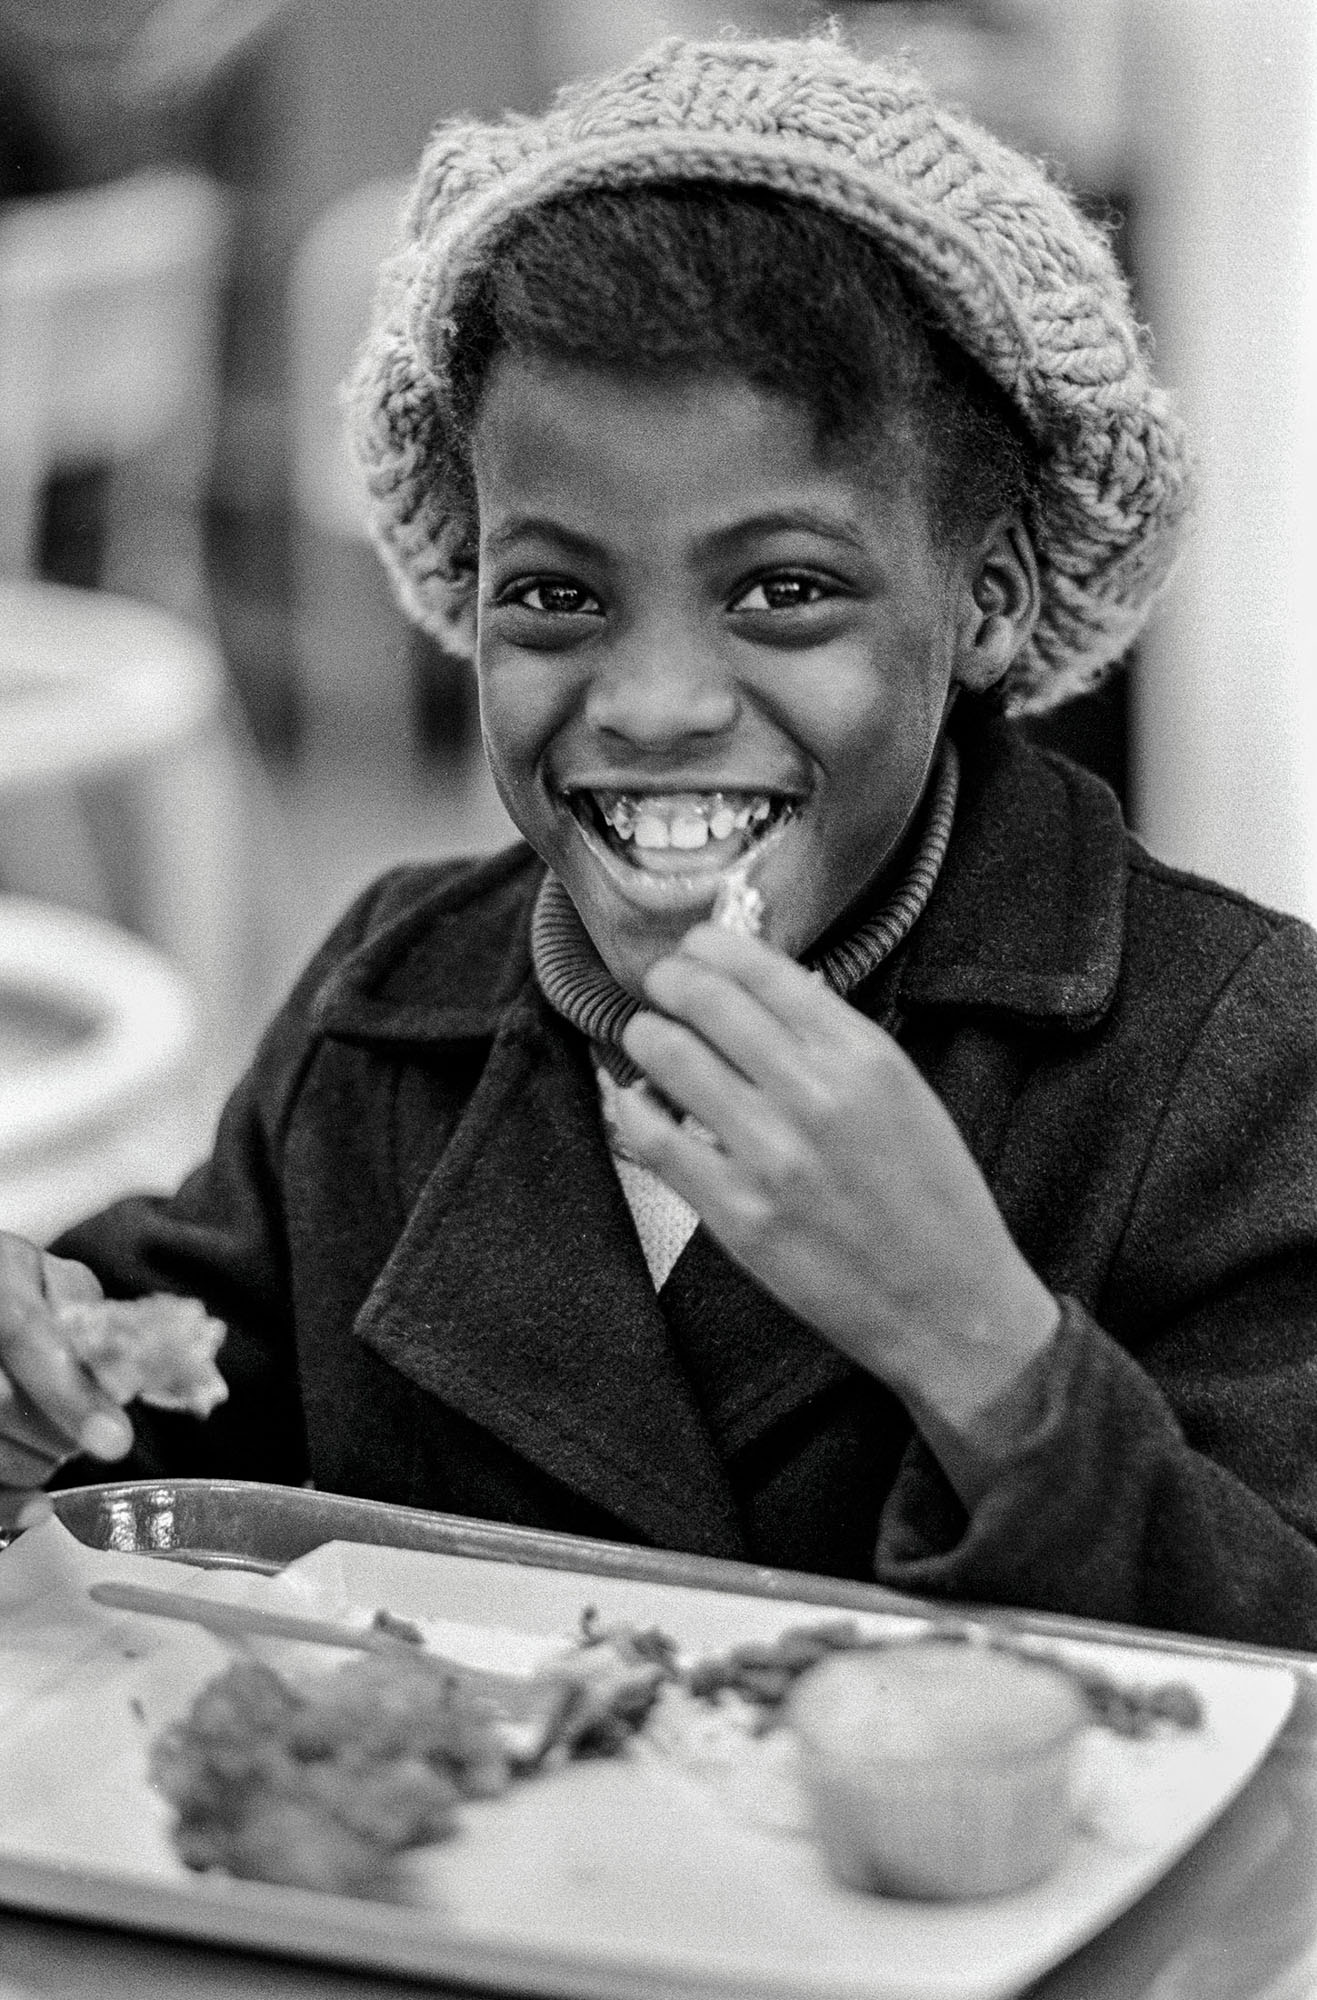 1972 - St. Augustine Church, Oakland, California: Breakfast for Children Program run by the Black Panther Party. The breakfast program gave nourishment and love to children before school.